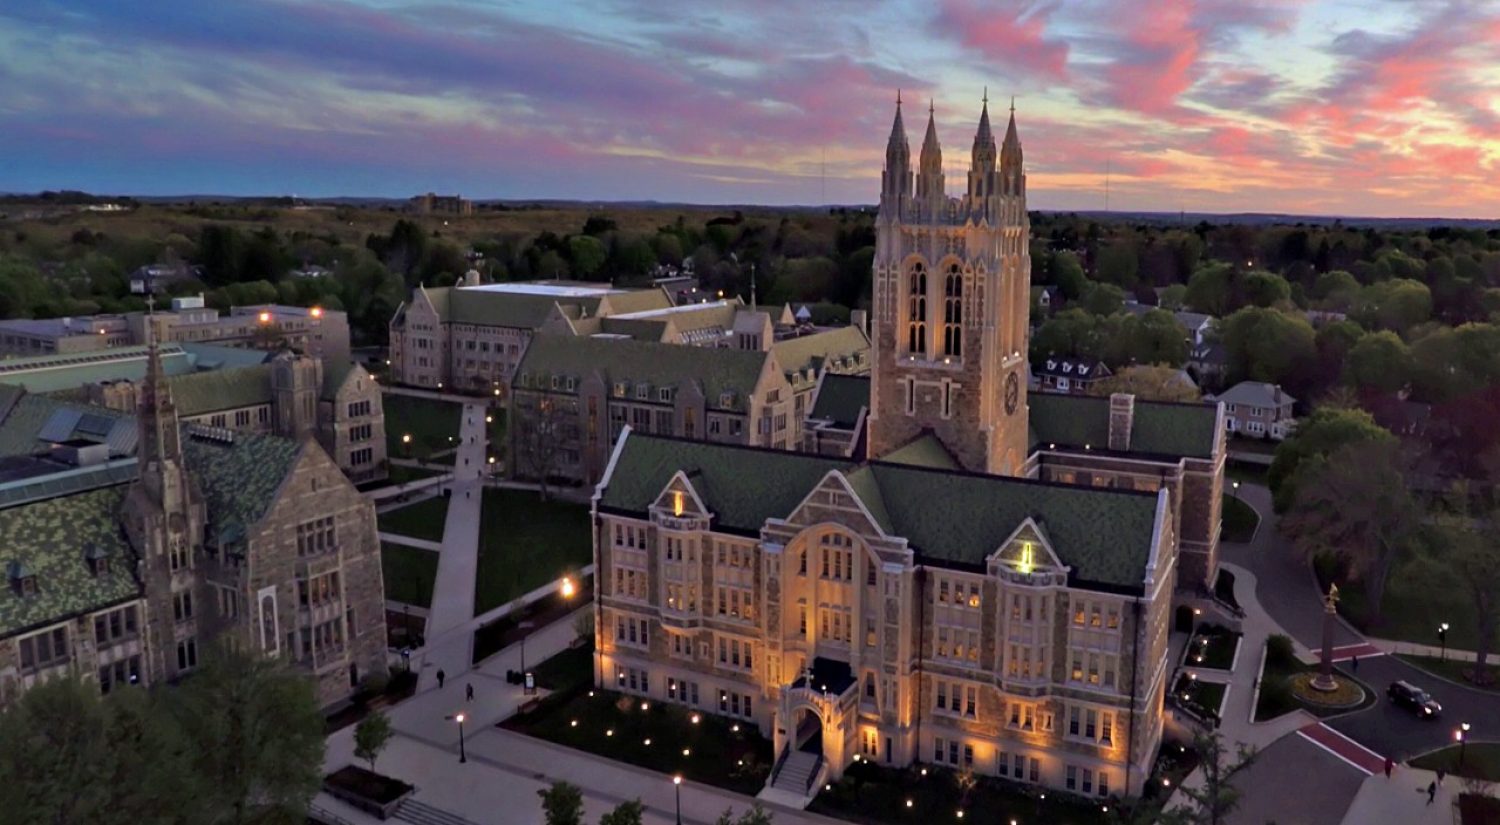 aerial shot of Gasson Hall at sunset